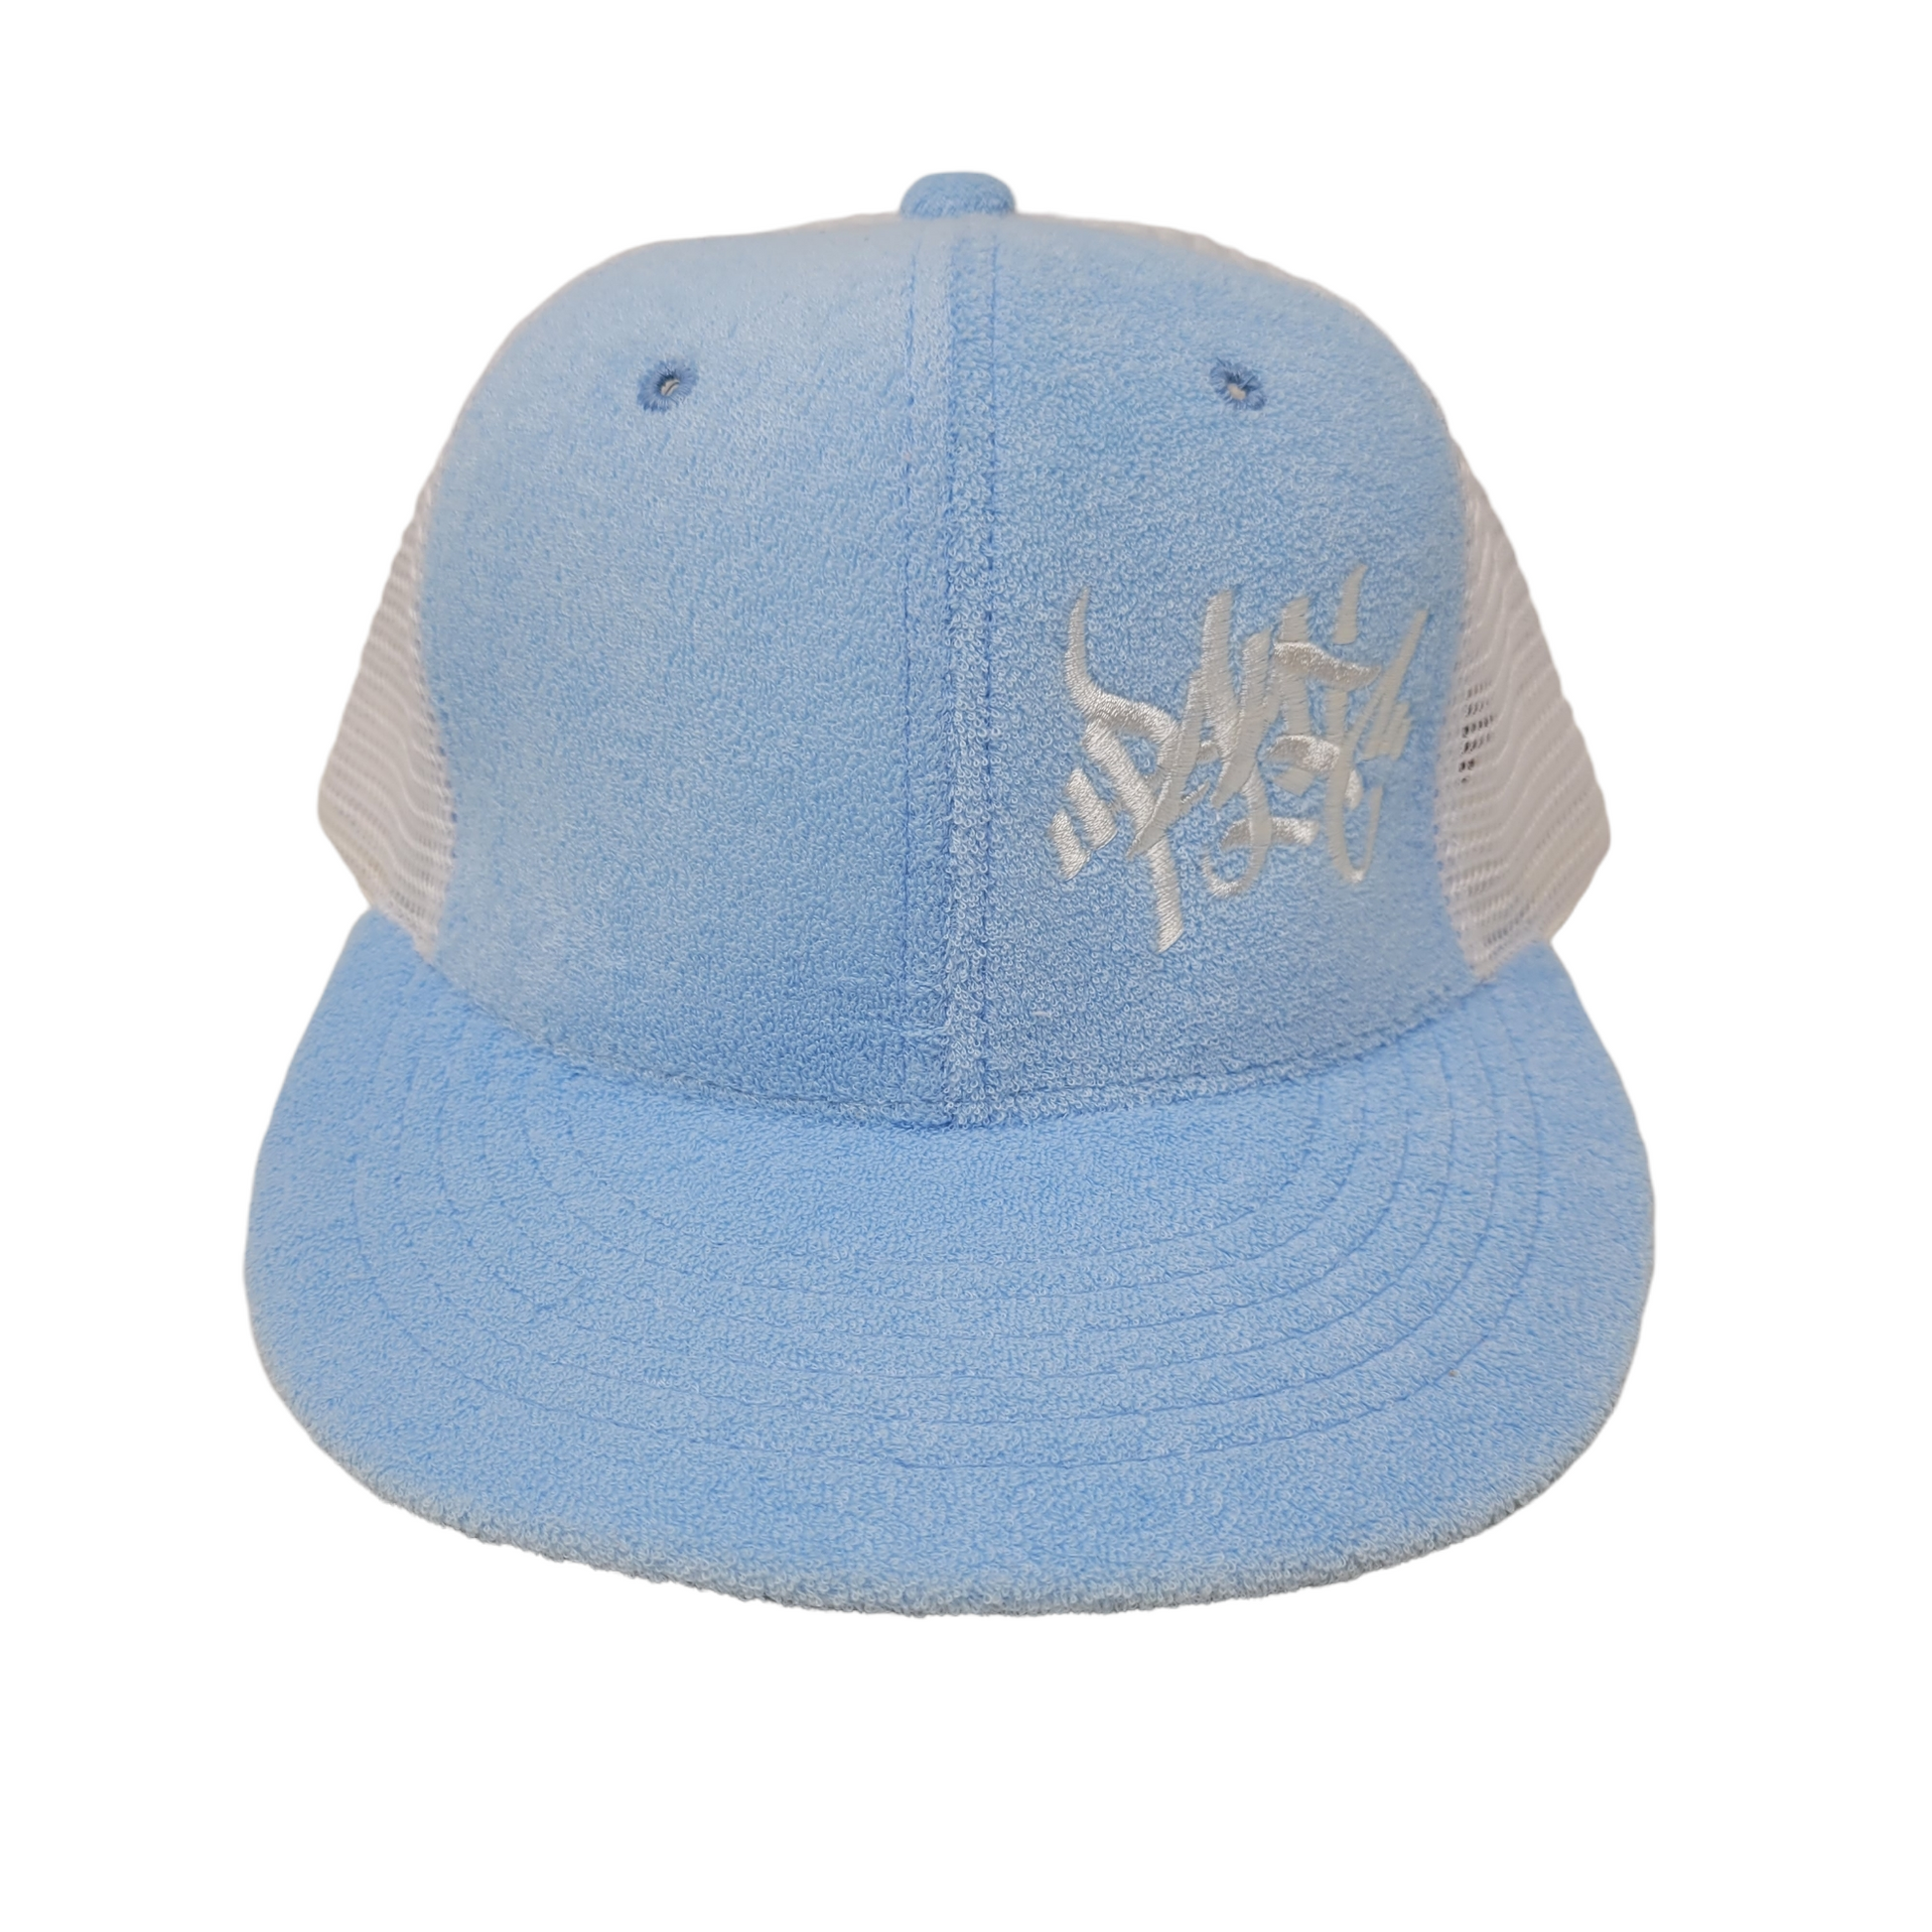 THE BABY BLUE TERRY CLOTH / WHITE MESH TAG LOGO SNAPBACK HAT - Panic 39